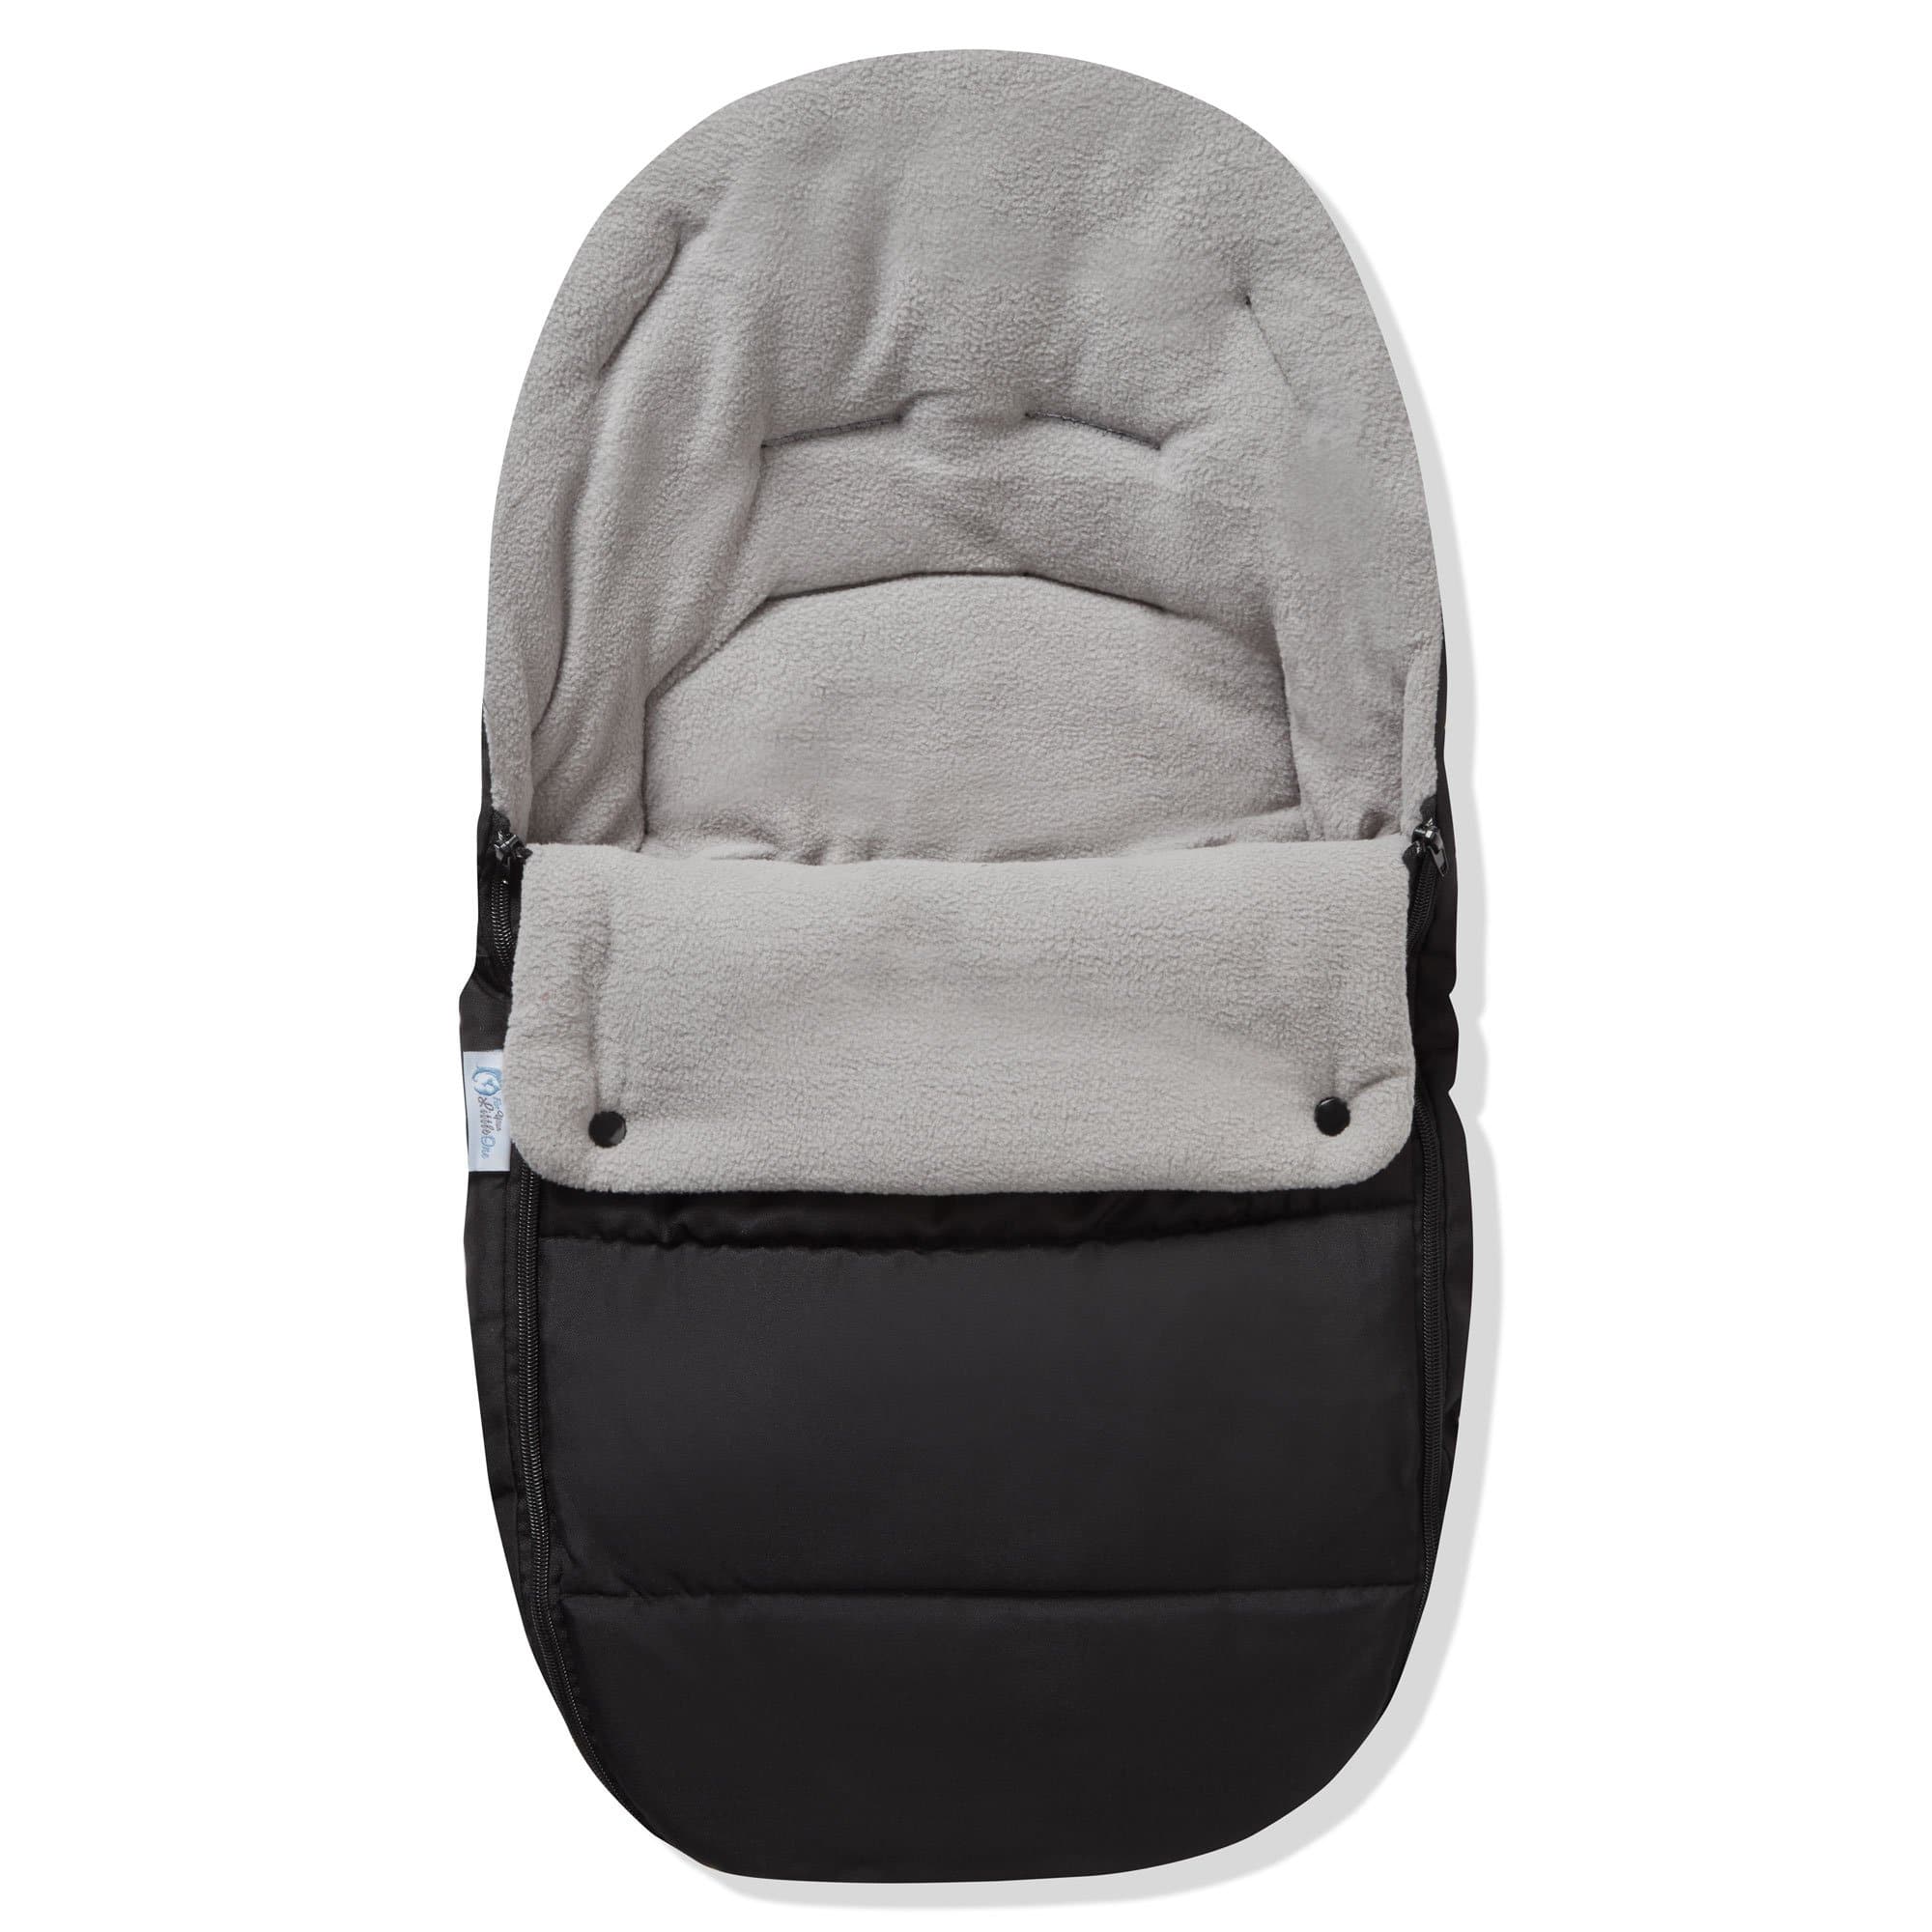 Premium Car Seat Footmuff / Cosy Toes Compatible with Joie - Dolphin Grey / Fits All Models | For Your Little One